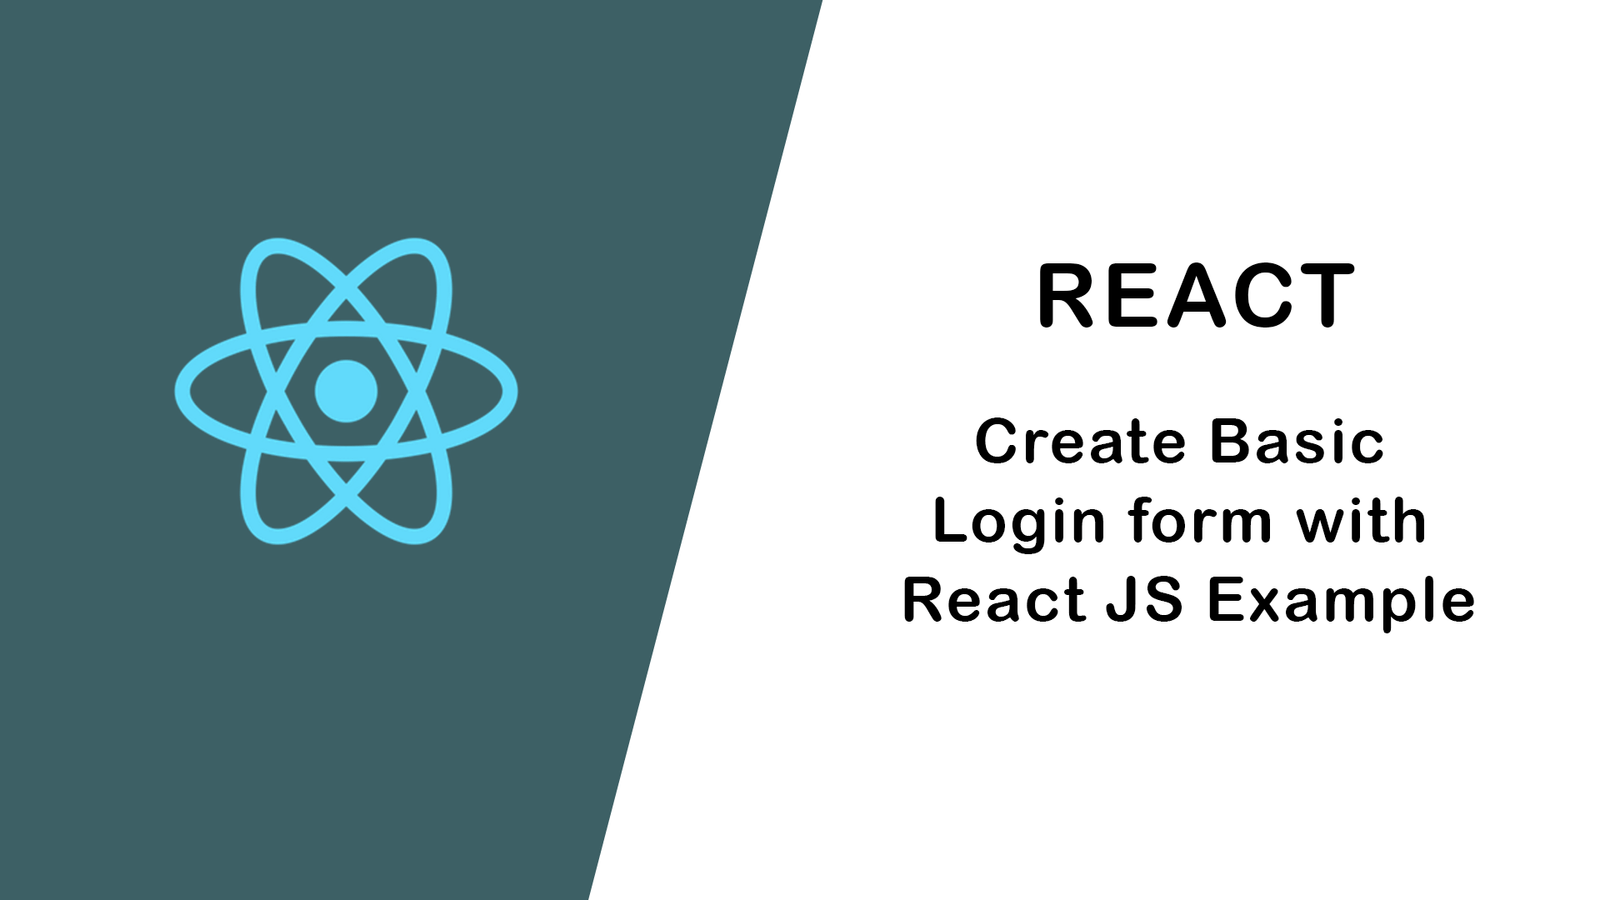 Create Basic Login form with React JS Example